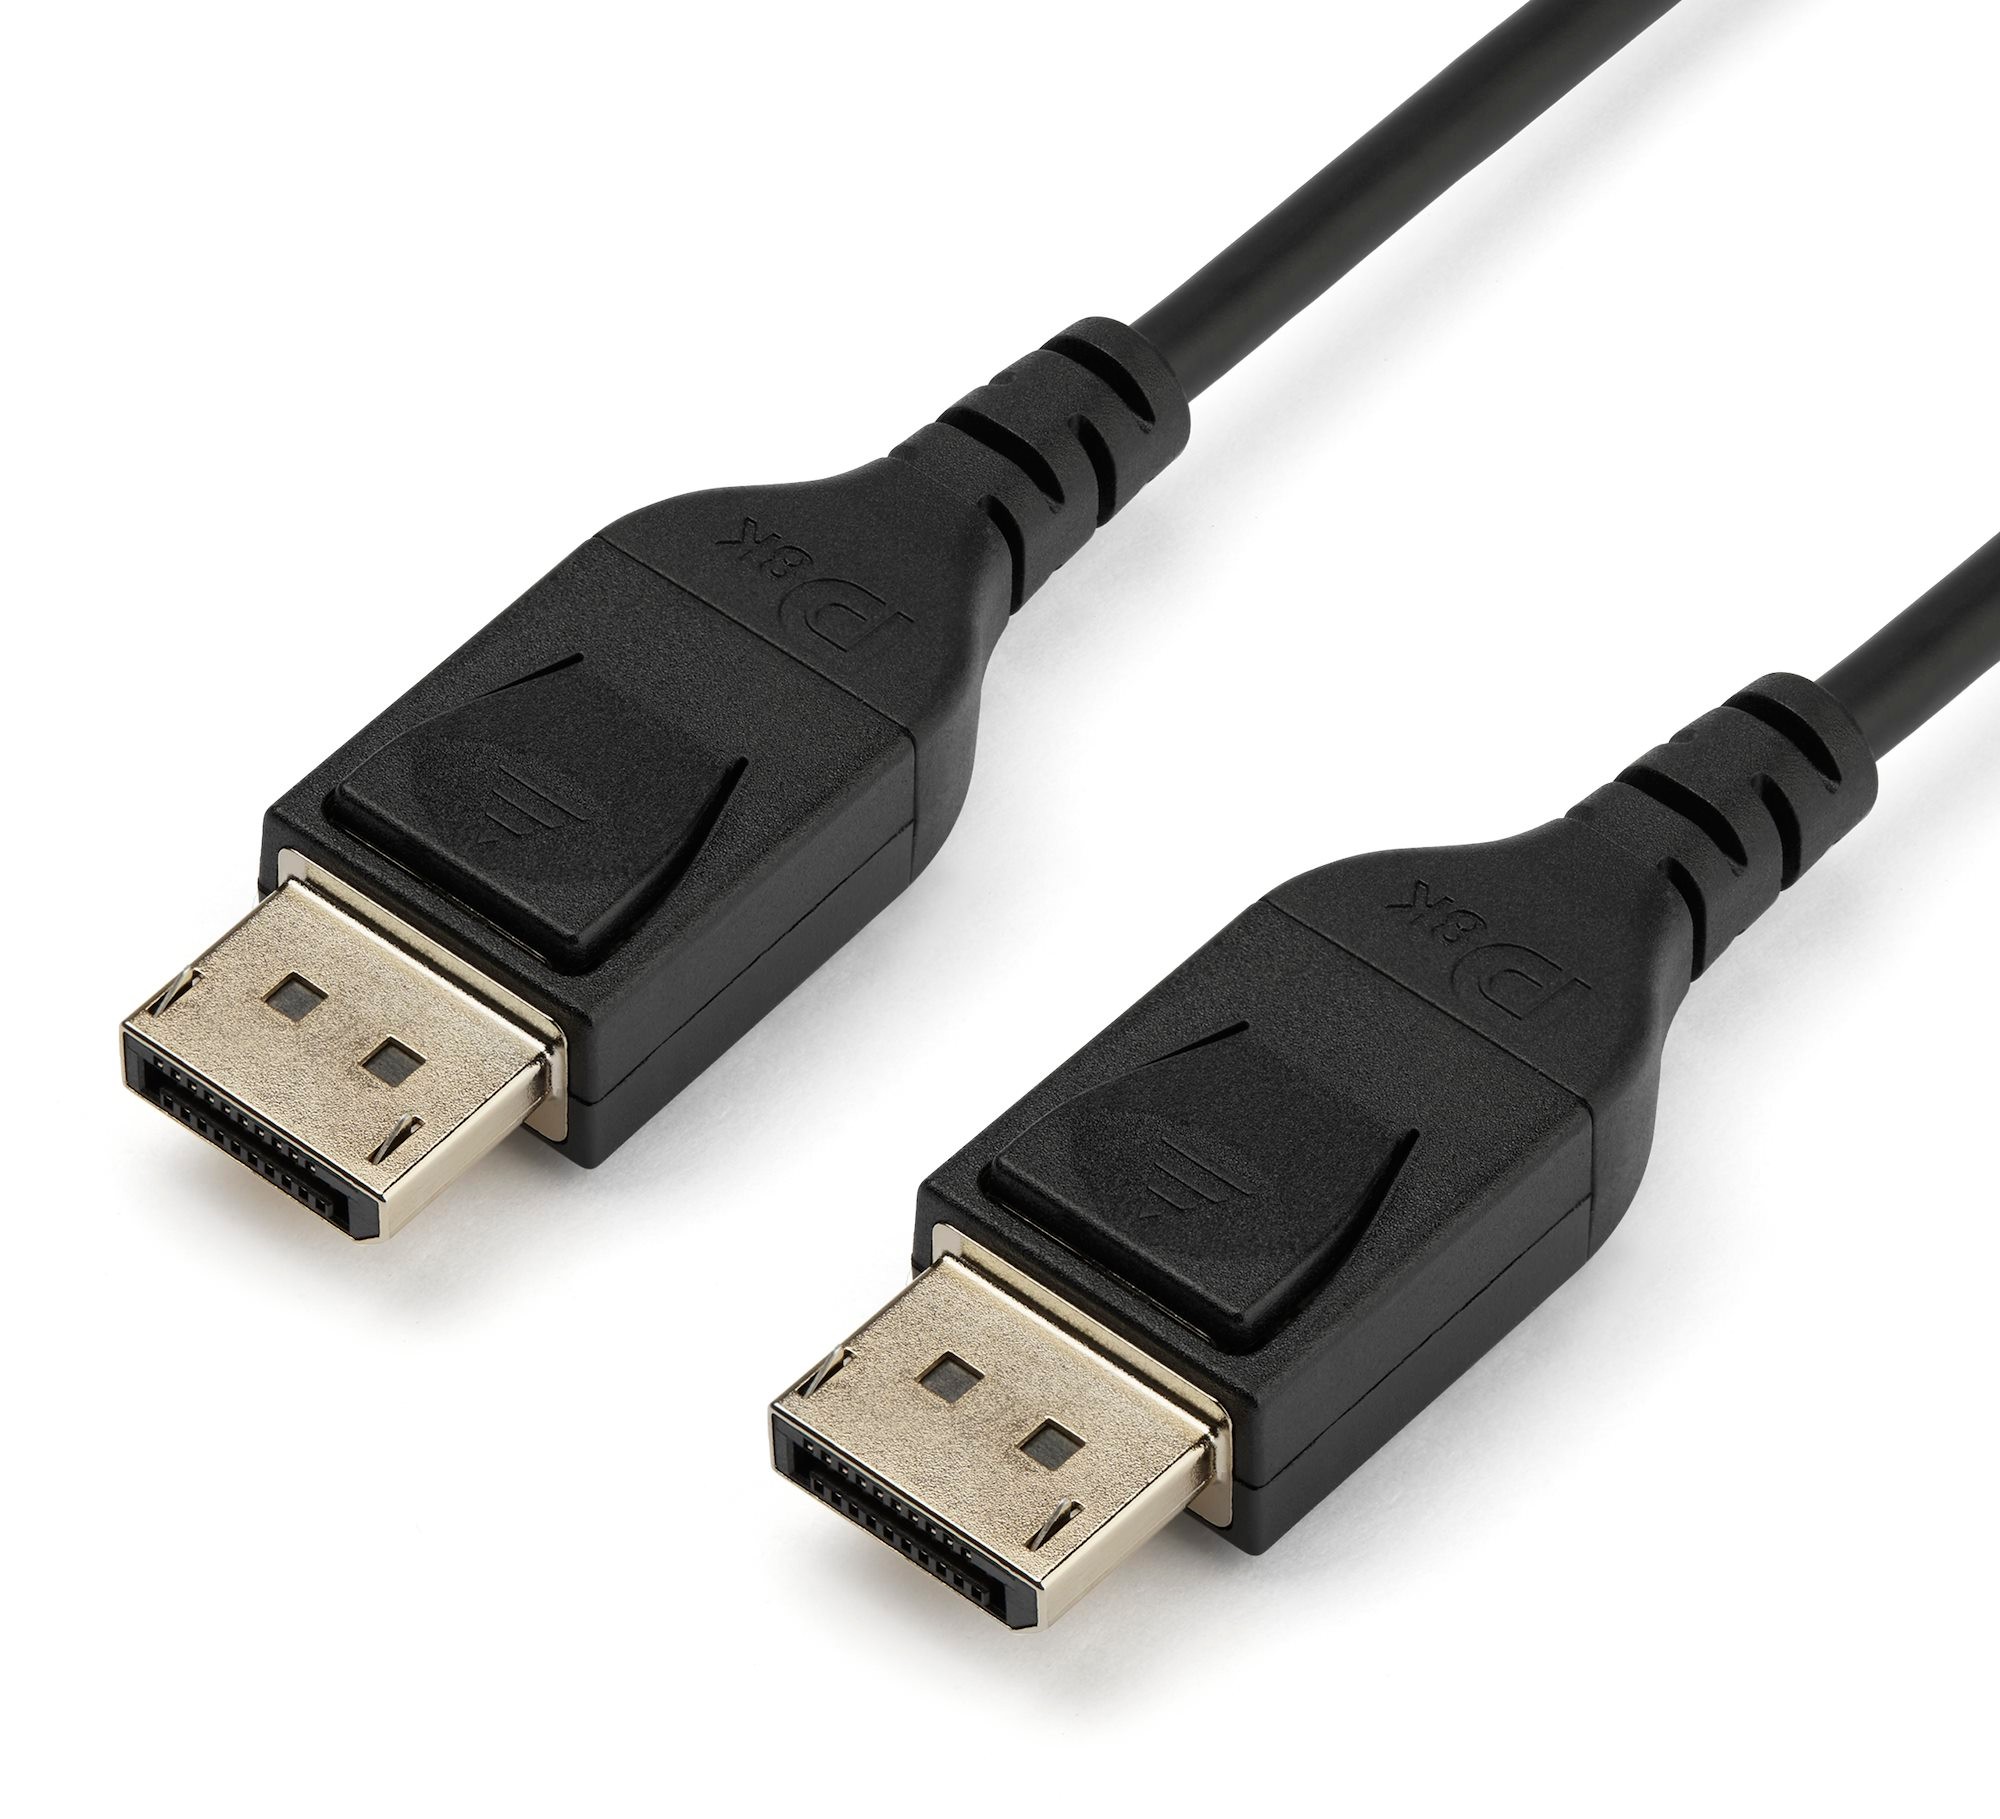 3m HDMI Cable - 4K High Speed HDMI Cable with Ethernet - 4K 30Hz UHD HDMI  Cord - 10.2 Gbps Bandwidth - HDMI 1.4 Video / Display Cable M/M 28AWG -  HDCP